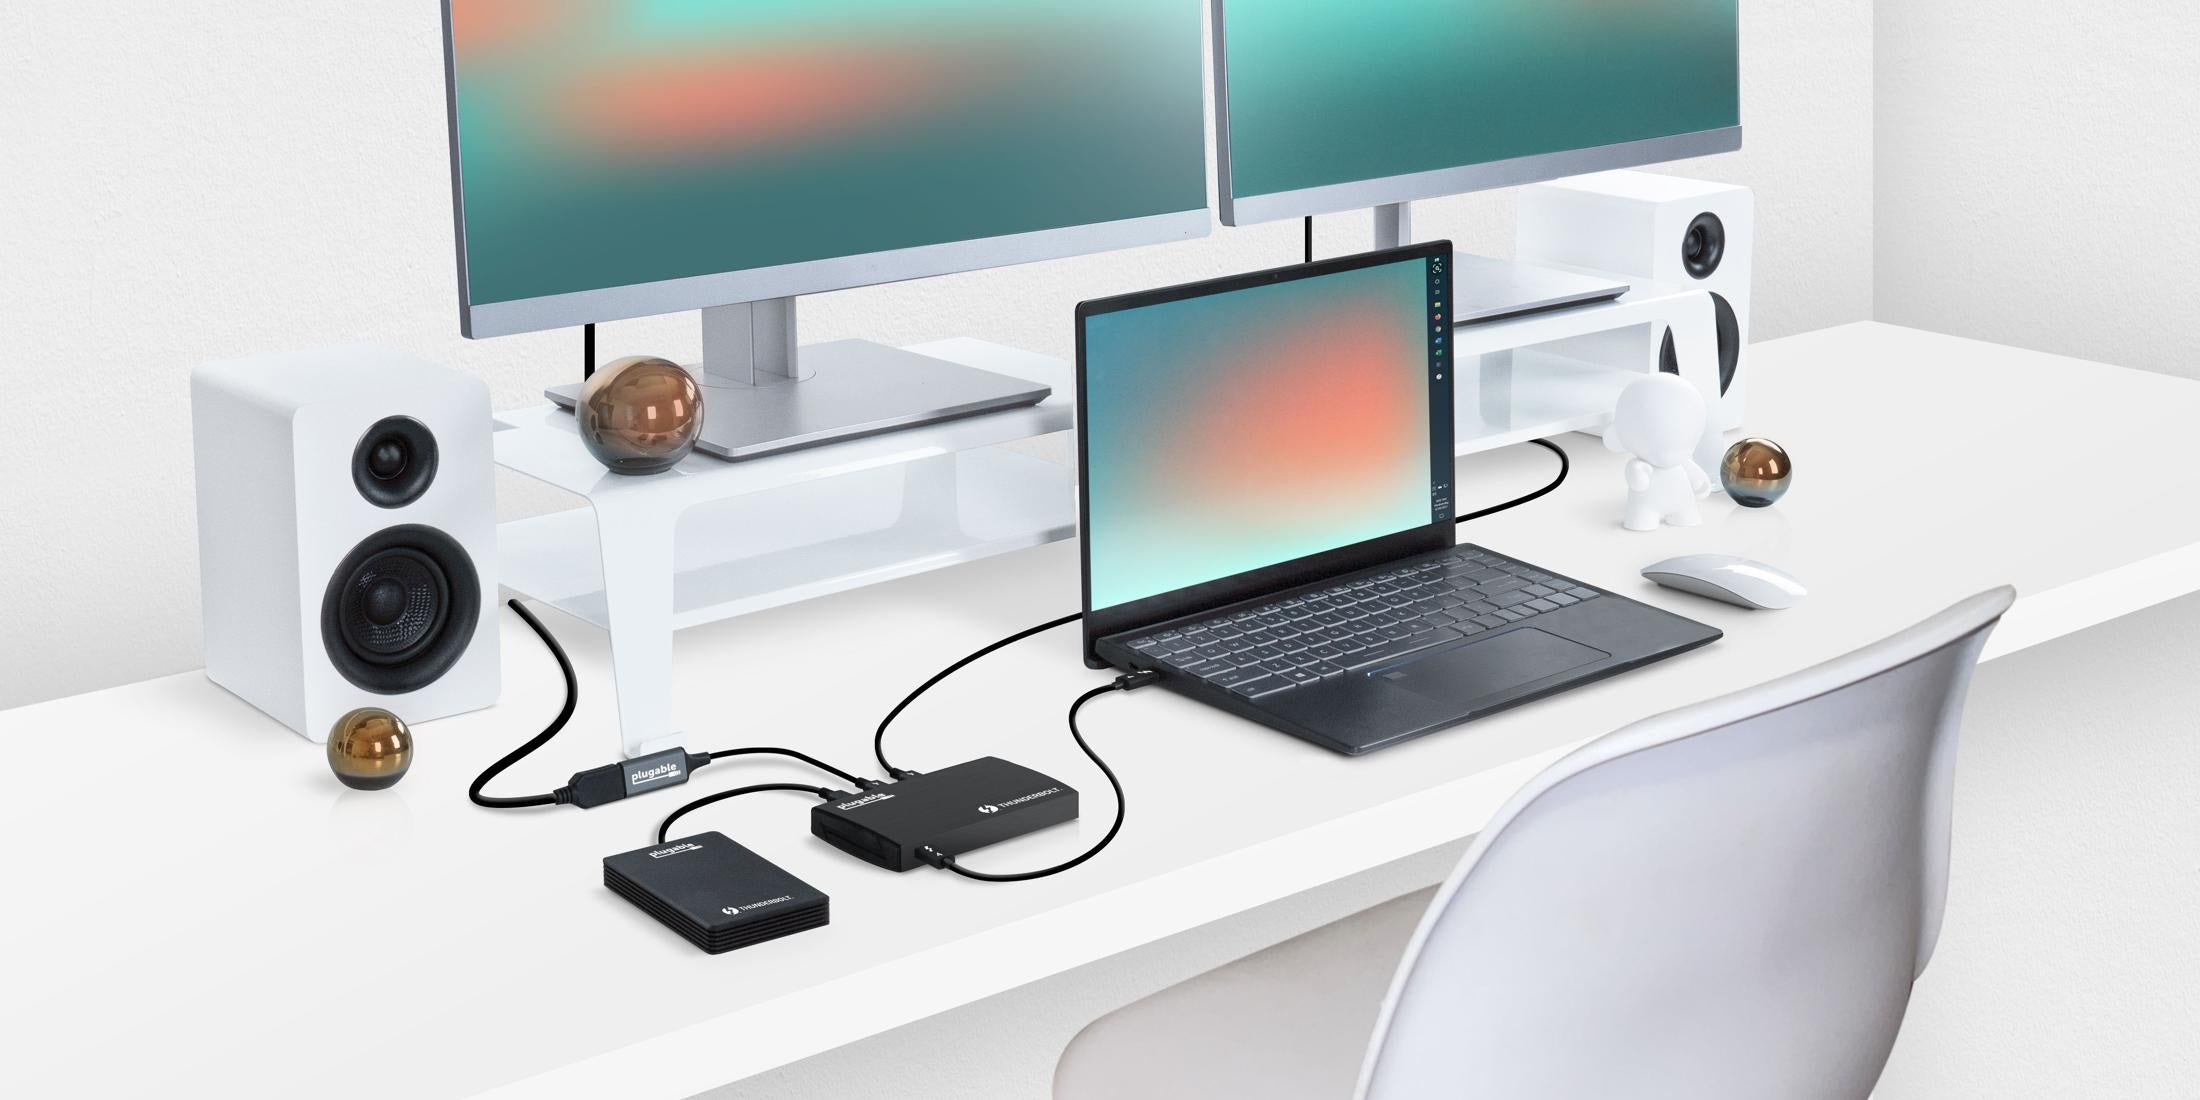 Image of a setup with a laptop and a TBT4-HUB3C connected to peripherals